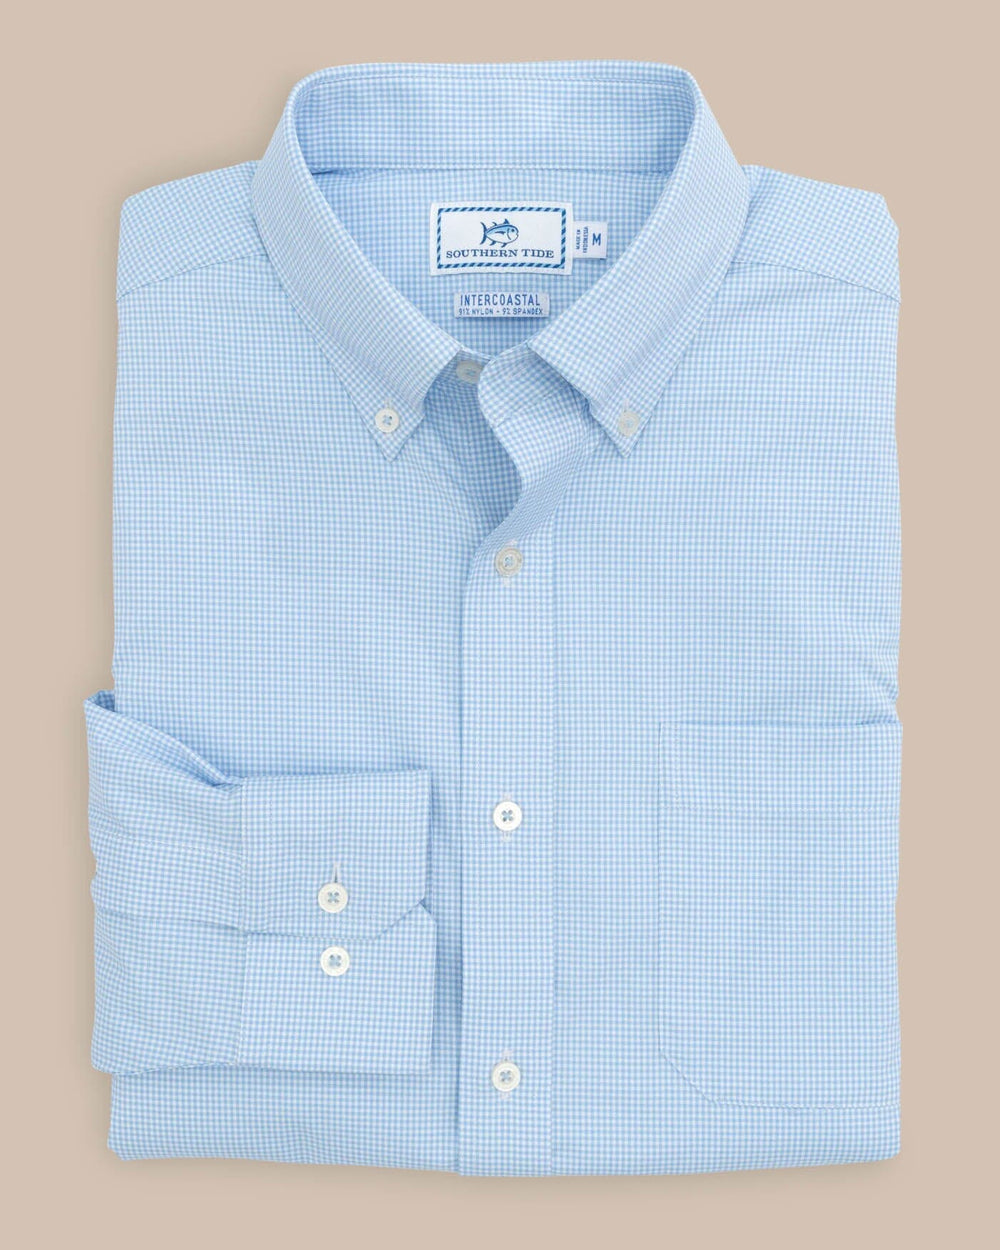 The front view of the Southern Tide Team Colors Gingham Intercoastal Sport Shirt by Southern Tide - Tide Blue